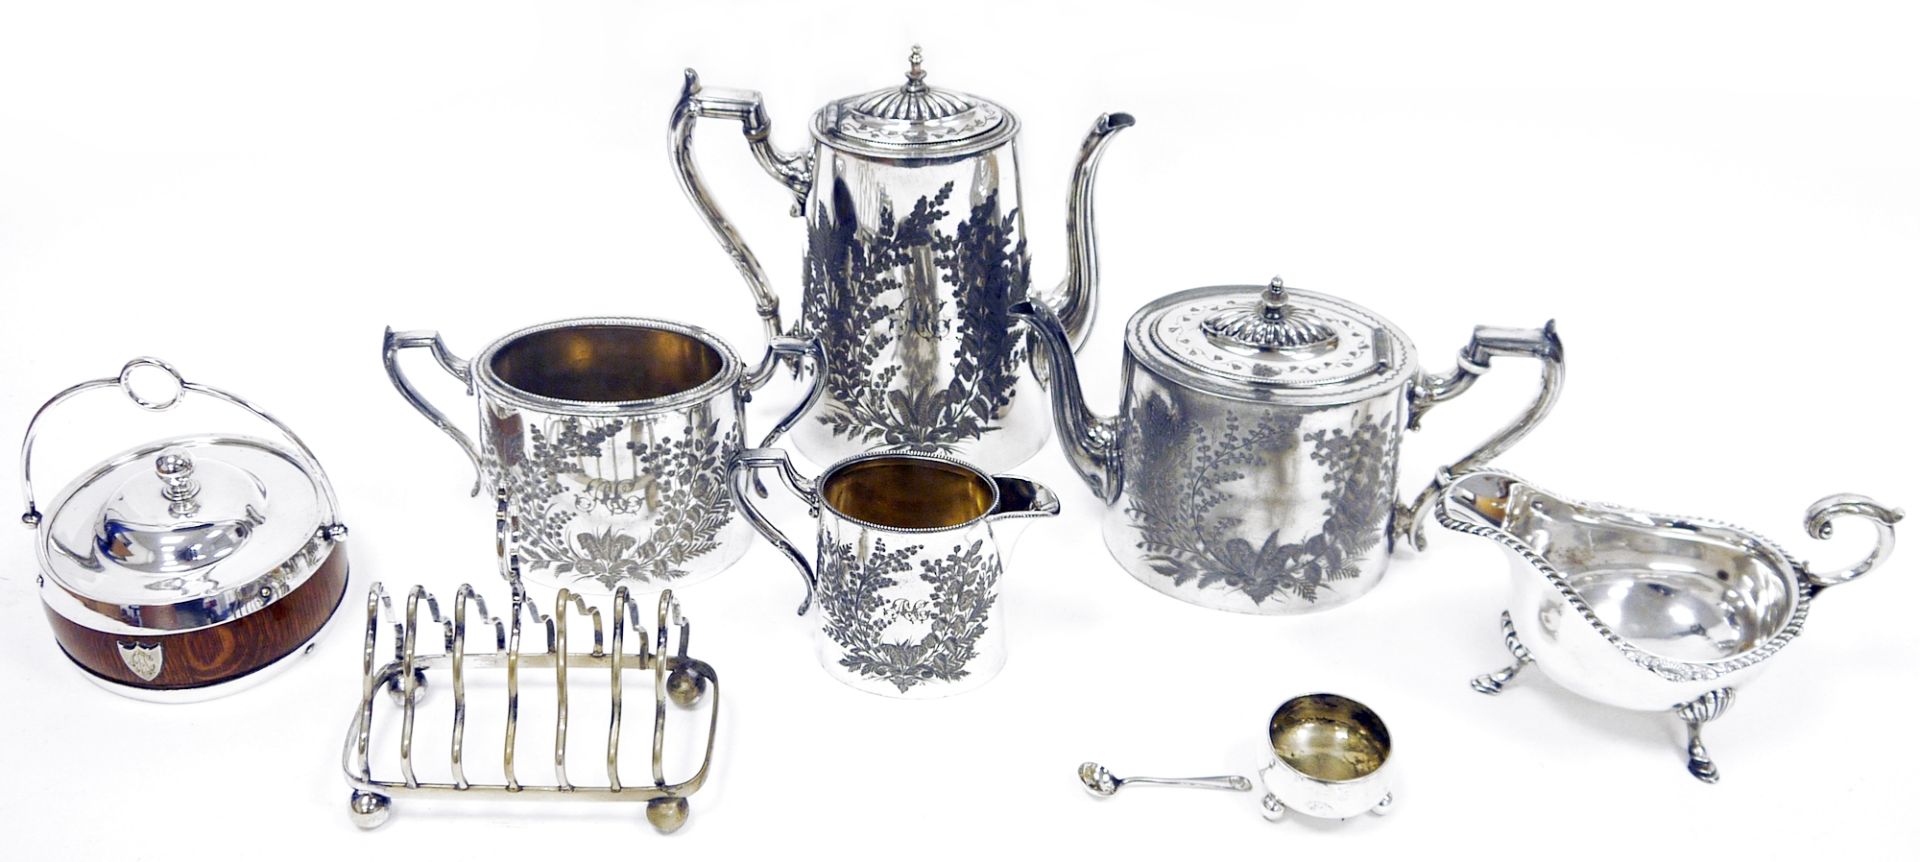 Victorian silver plated four-piece teaset comprising teapot, hot water pot, cream jug and sugar dish